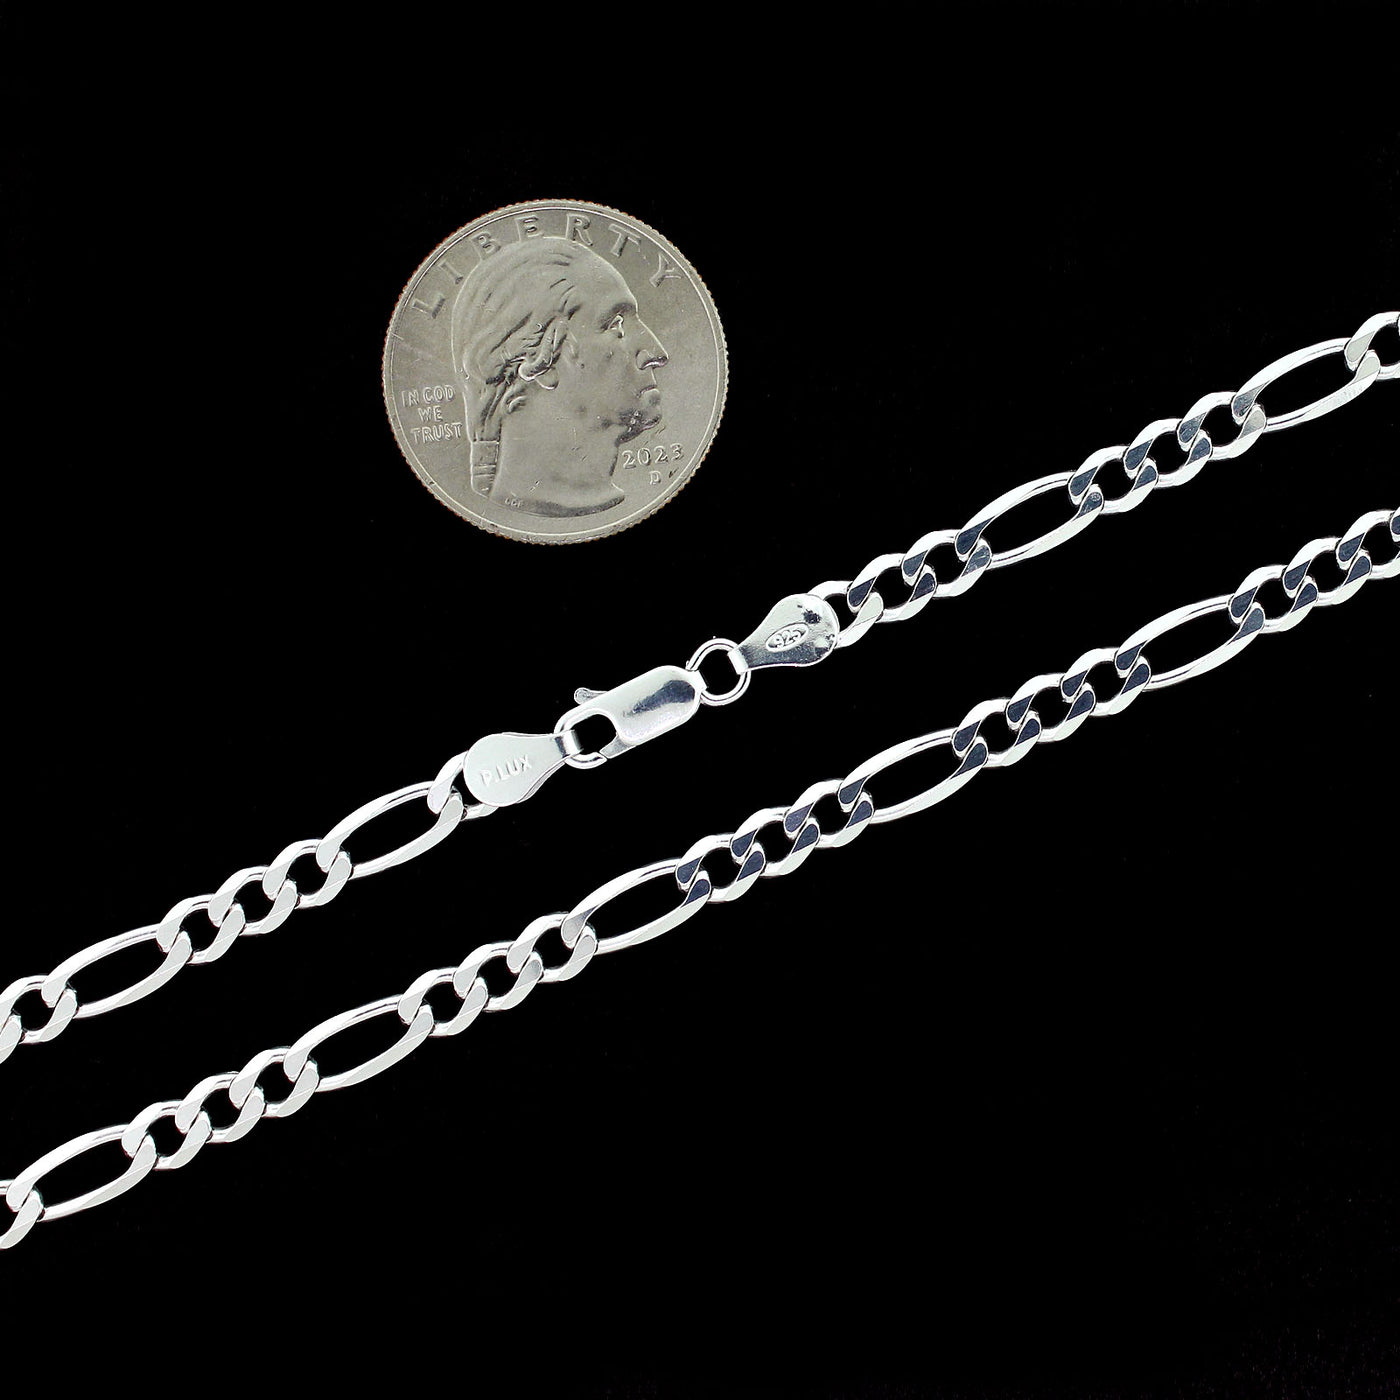 Real 5MM Solid 925 Sterling Silver Italian FIGARO LINK CHAIN Necklace UNISEX